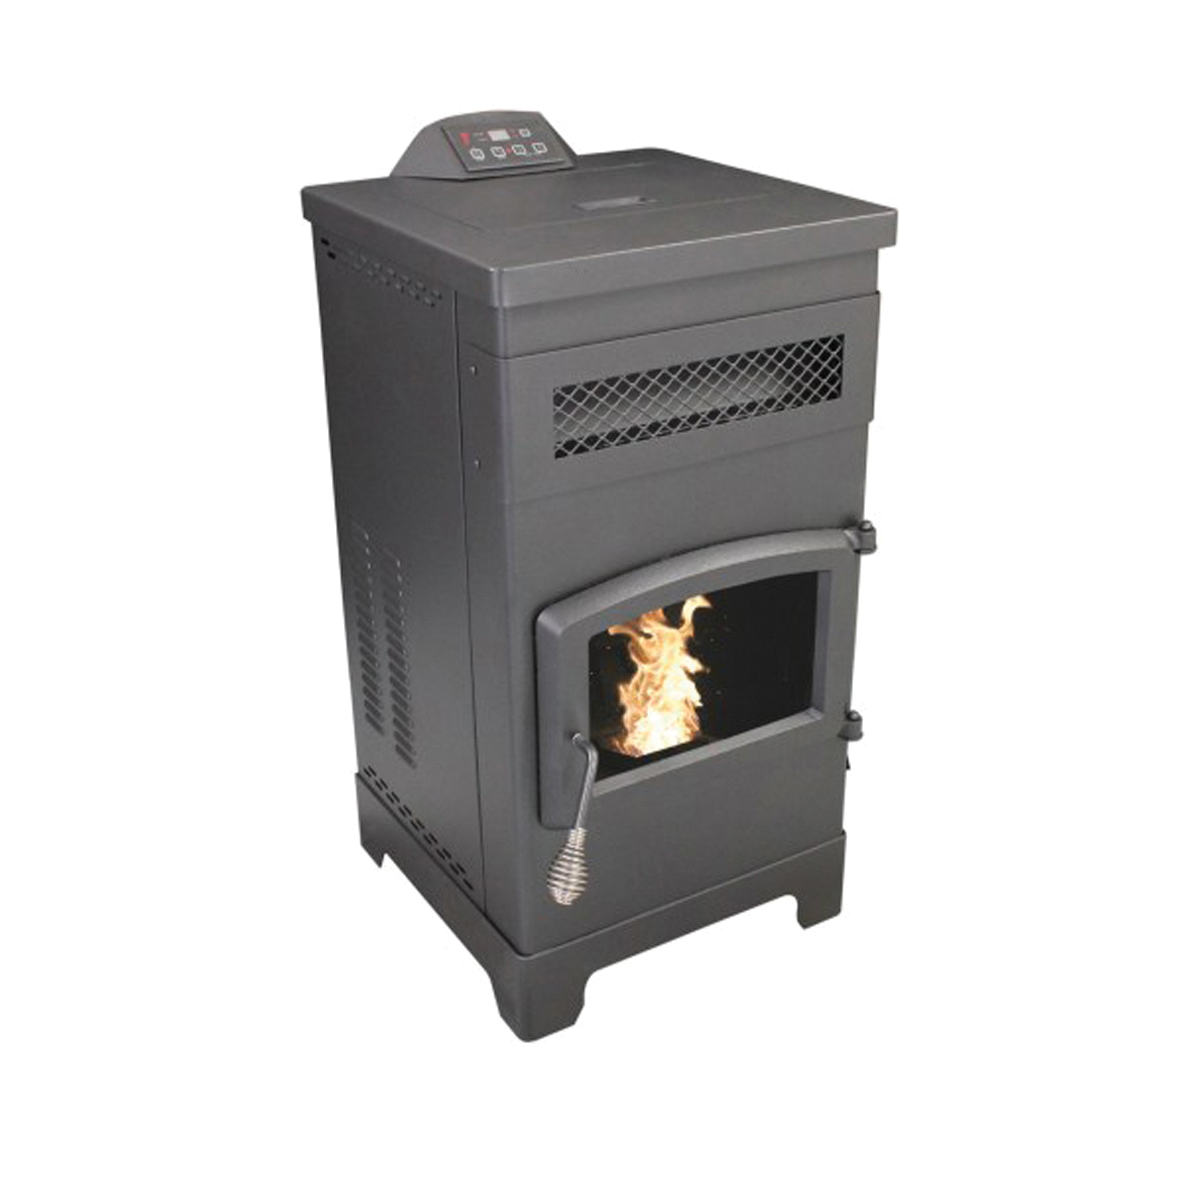 VG5770 Free-Standing Pellet Stove with Hopper, 23 in W, 23-1/2 in D, 44 in H, 48,000 Btu Heating, Iron, Black